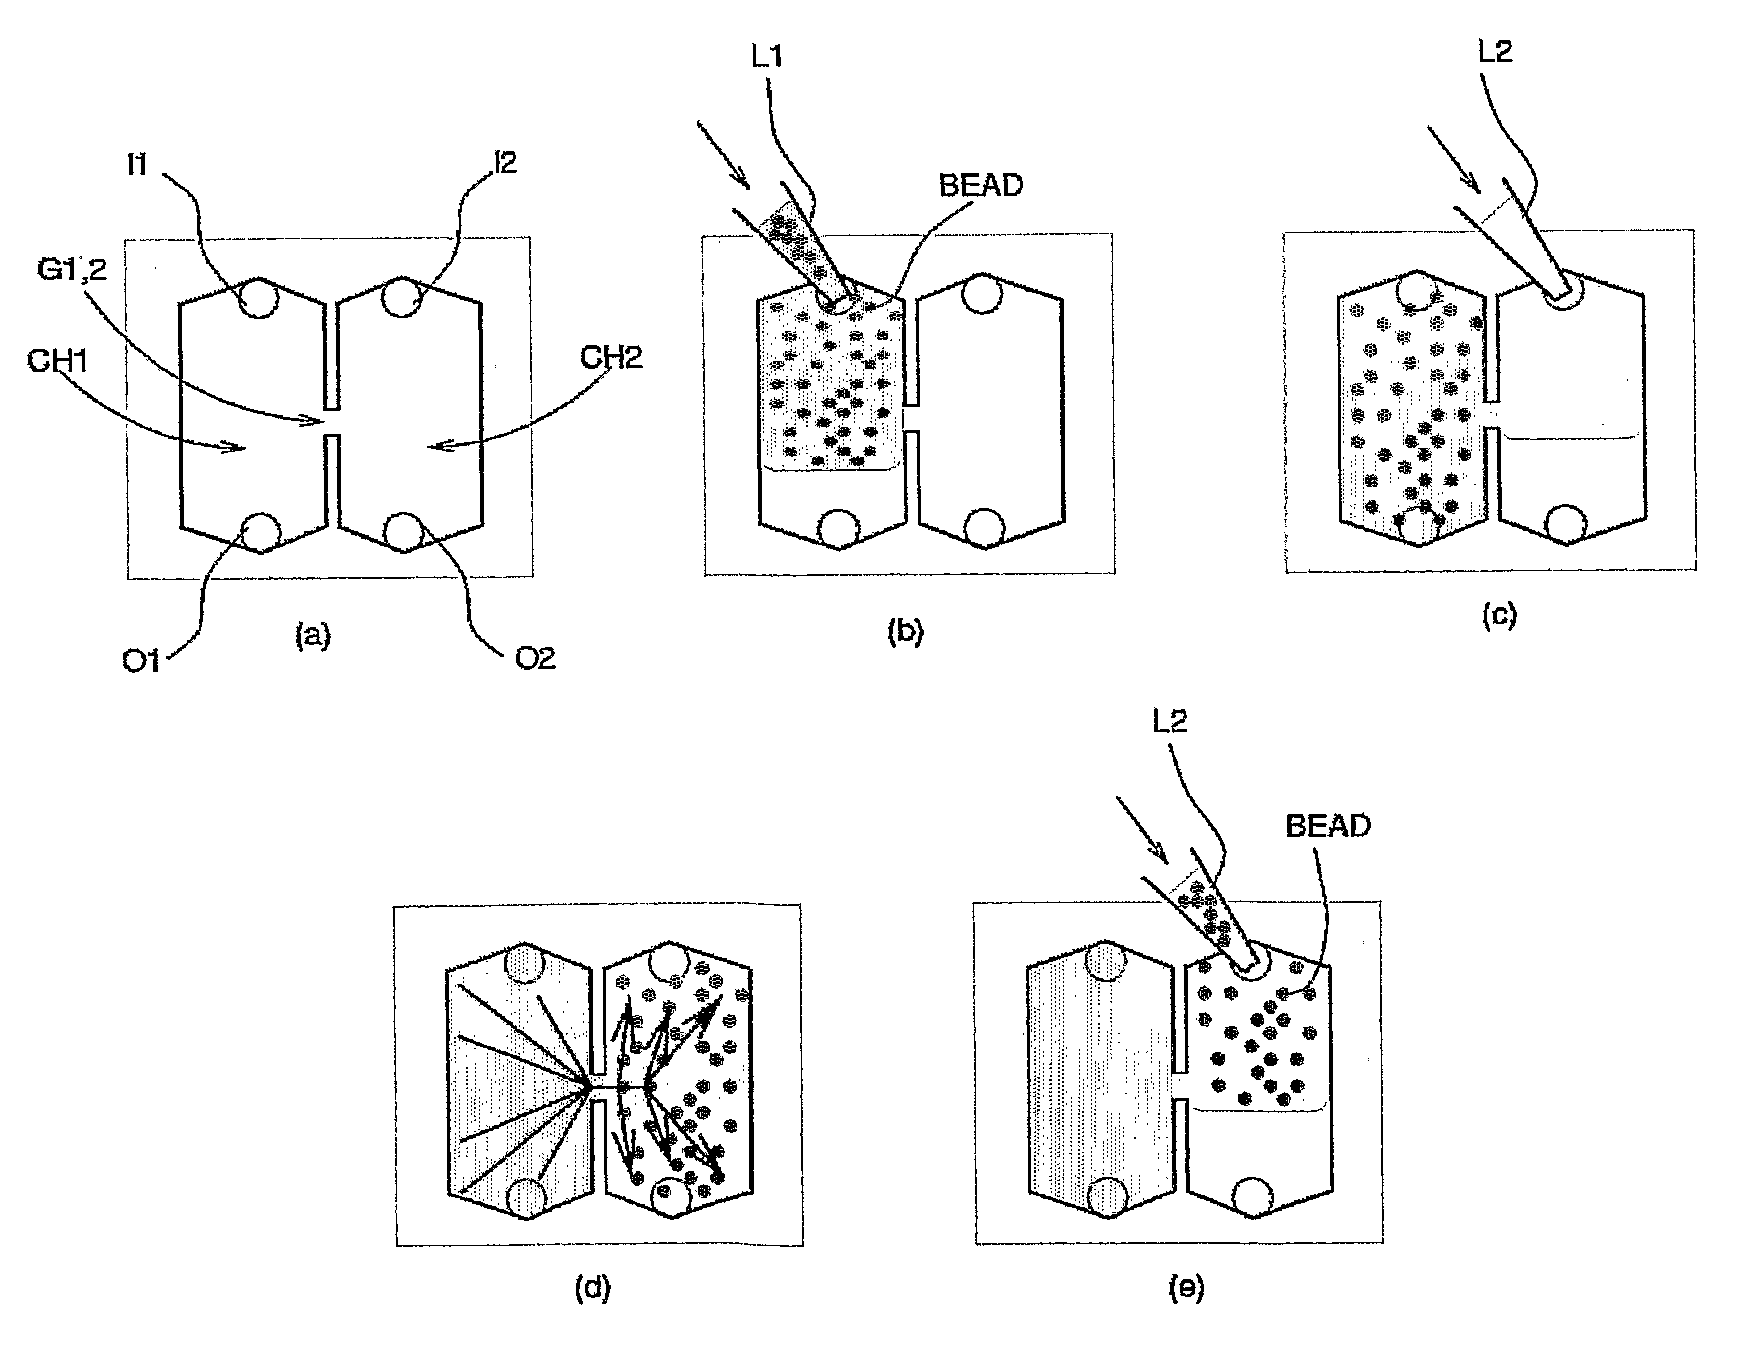 Method And Apparatus For The Processing And/Or Analysis And/Or Selection Of Particles, In Particular Biological Particles